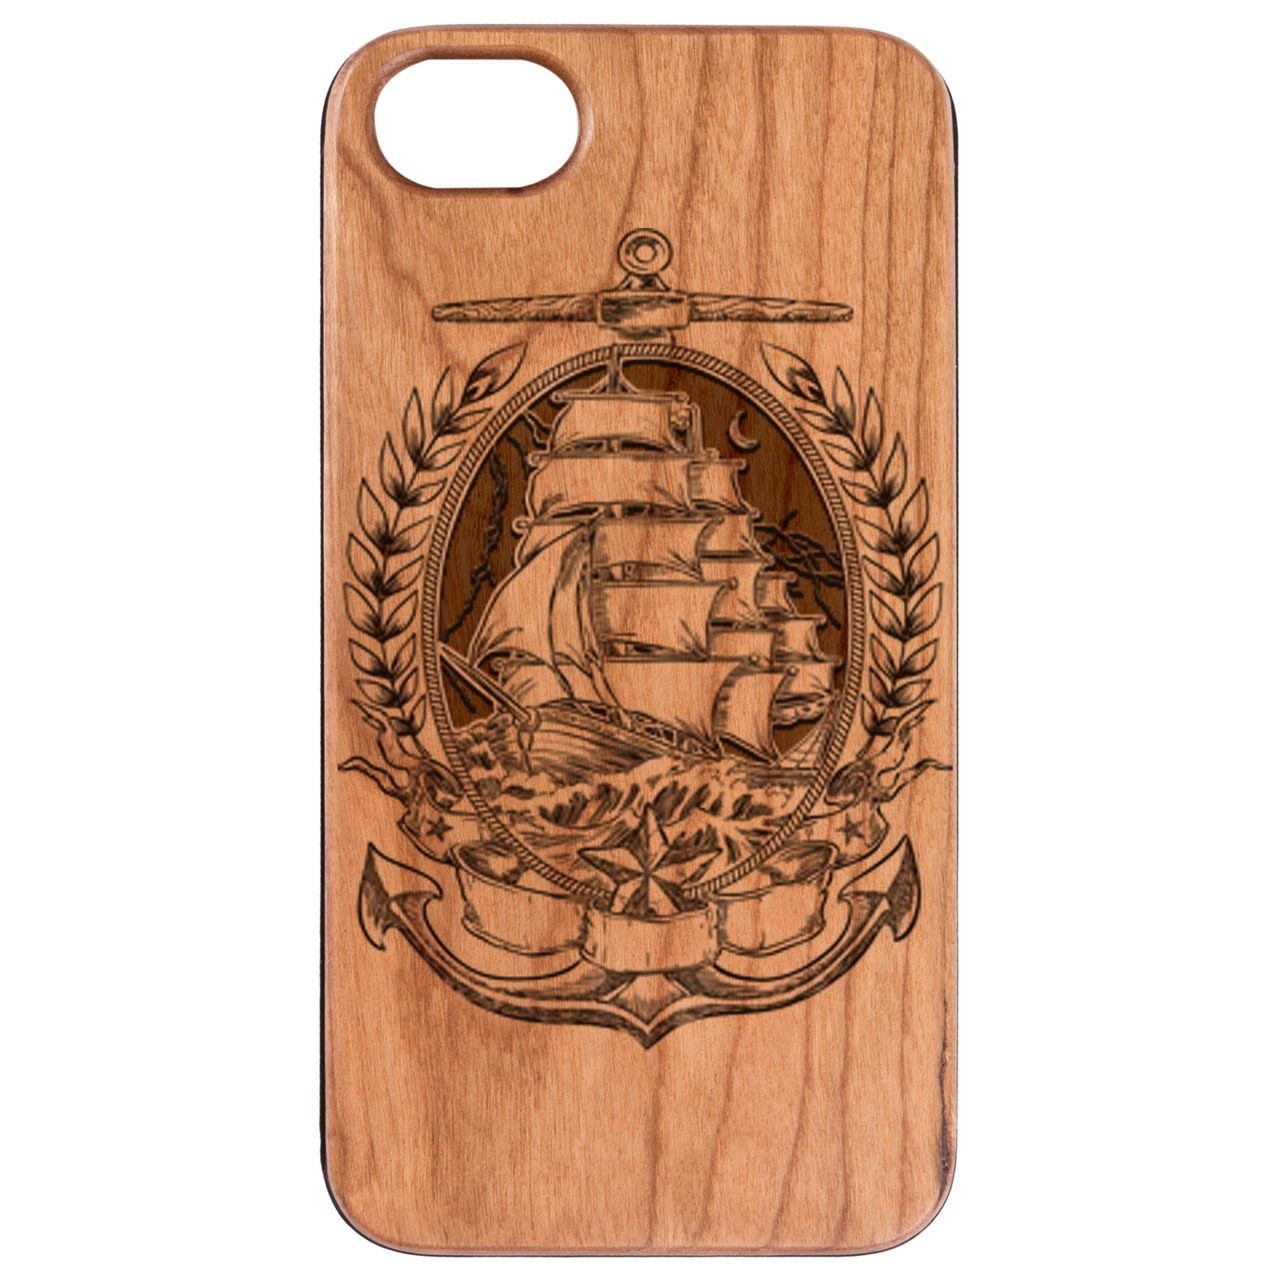  Pirate Ship in Crest - Engraved - Wooden Phone Case - IPhone 13 Models